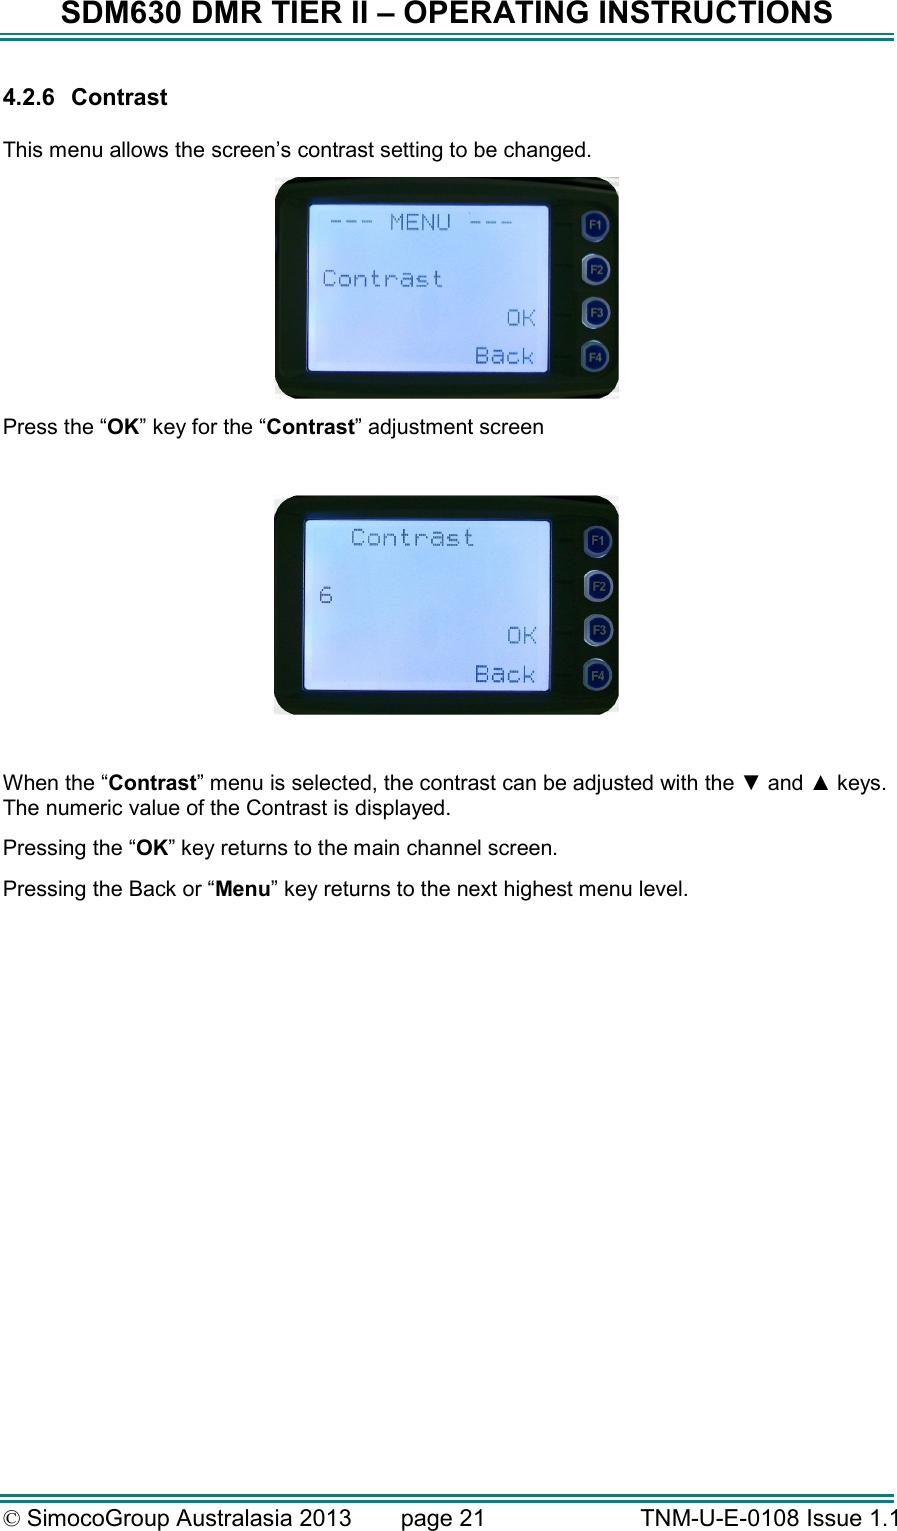 SDM630 DMR TIER II – OPERATING INSTRUCTIONS © SimocoGroup Australasia 2013   page 21   TNM-U-E-0108 Issue 1.1 4.2.6  Contrast  This menu allows the screen’s contrast setting to be changed.  Press the “OK” key for the “Contrast” adjustment screen    When the “Contrast” menu is selected, the contrast can be adjusted with the ▼ and ▲ keys.  The numeric value of the Contrast is displayed.  Pressing the “OK” key returns to the main channel screen.   Pressing the Back or “Menu” key returns to the next highest menu level. 